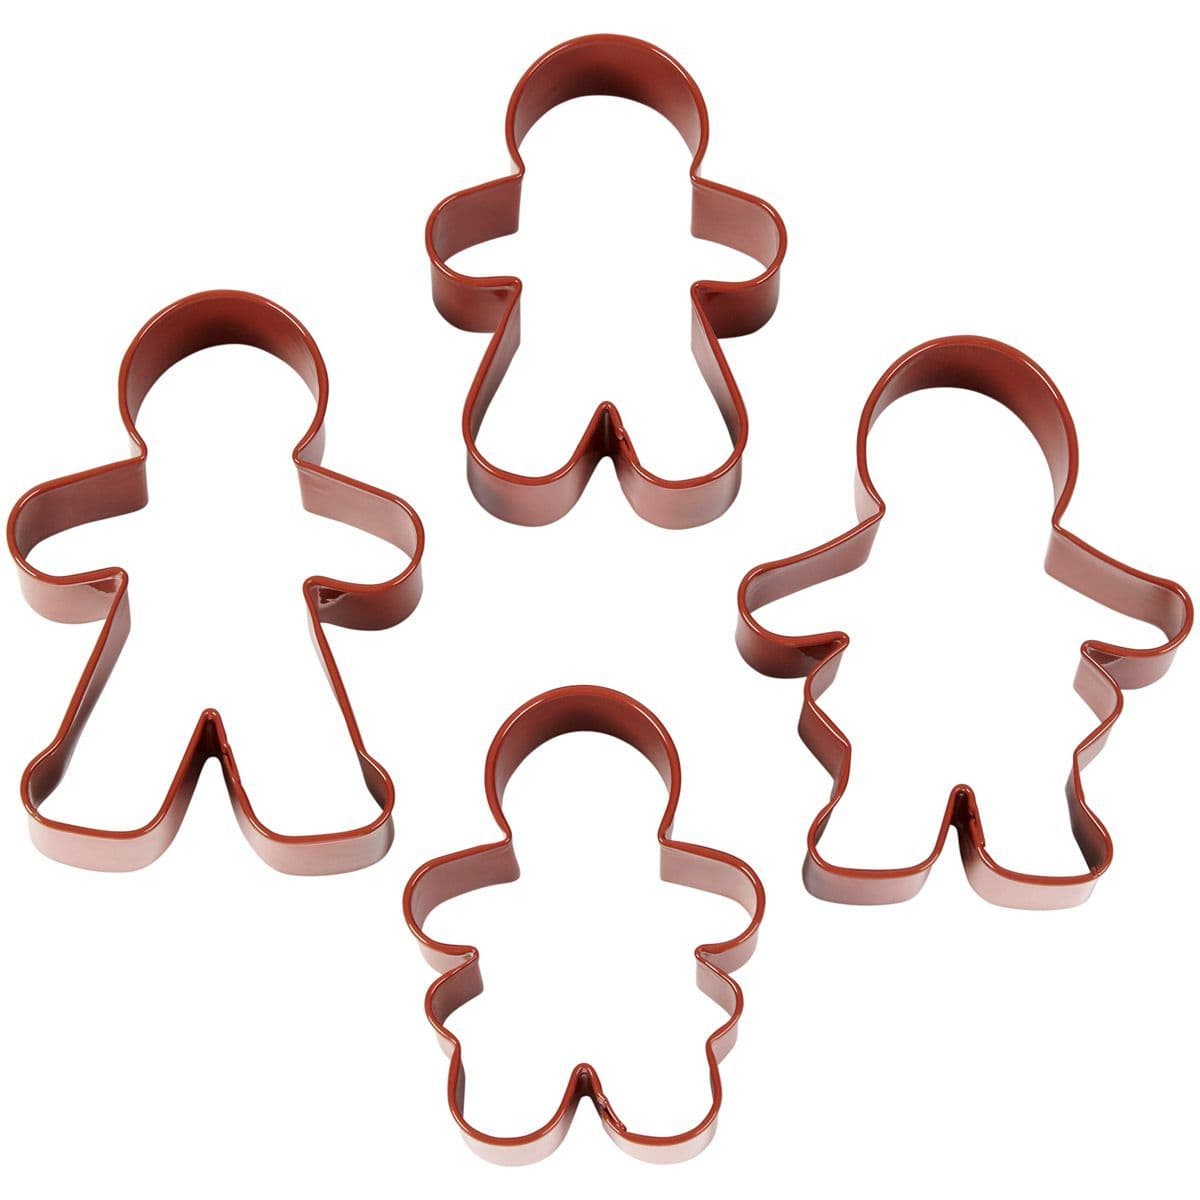 Gingerbread family cookie cutters man woman girl and boy